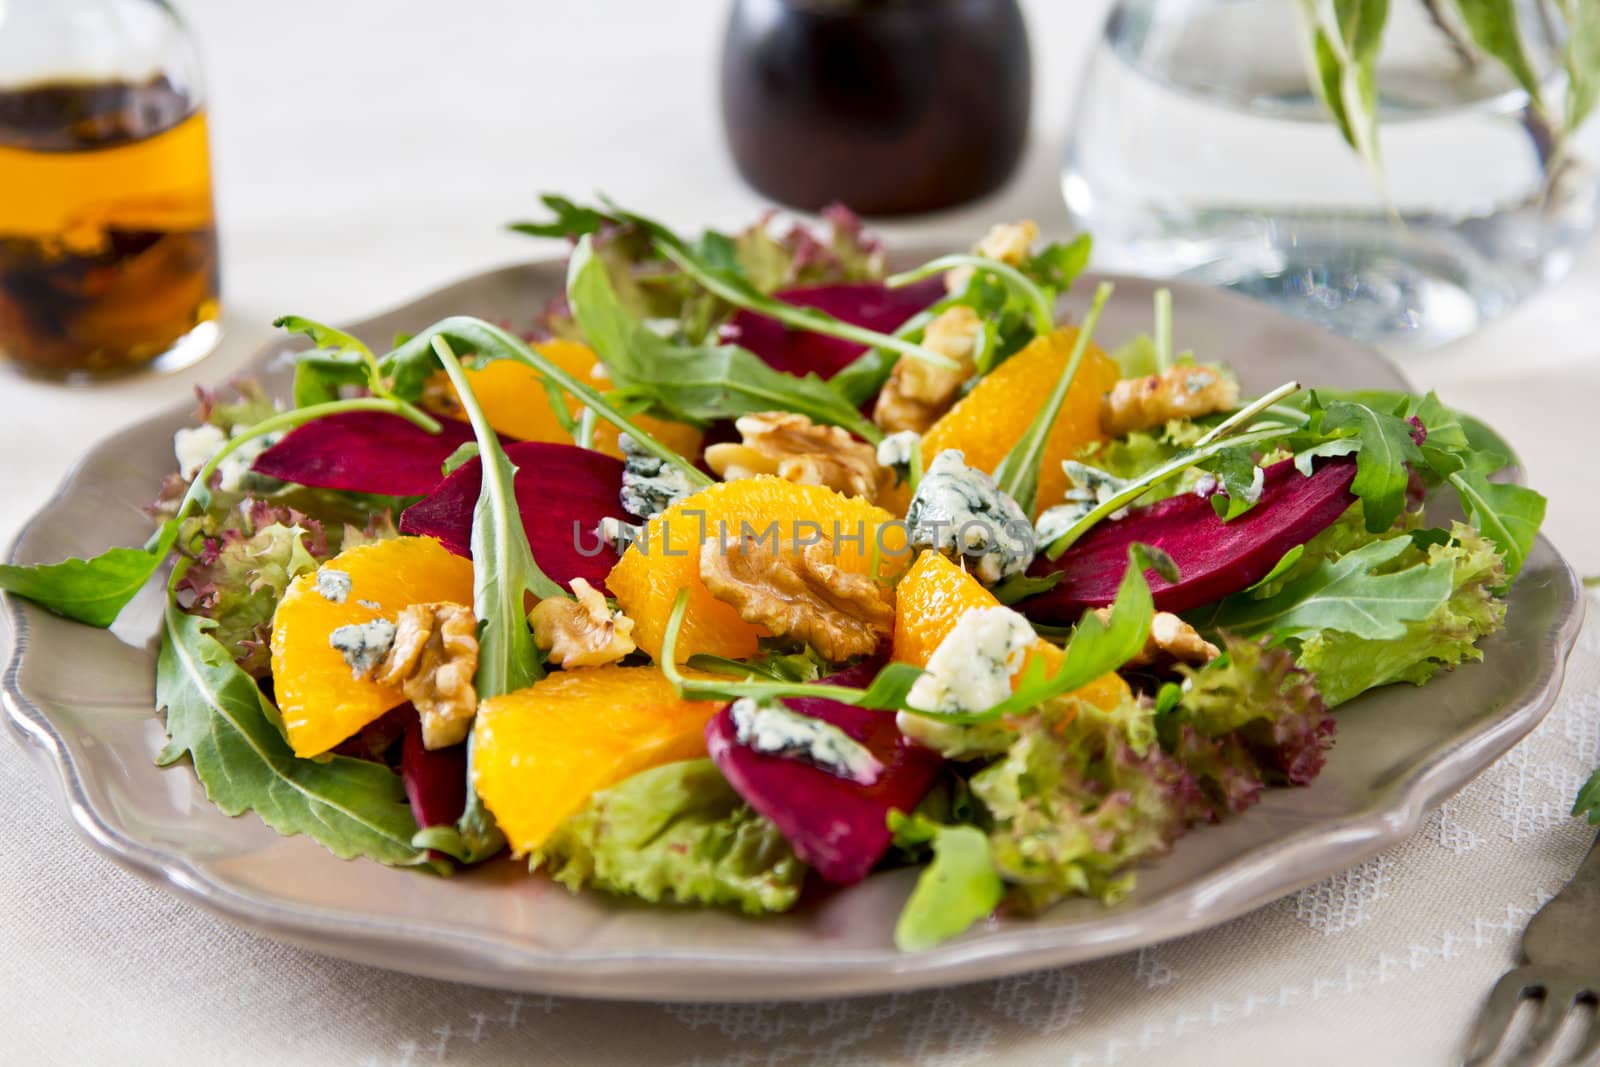 Beetroot,orange with blue cheese and rocket salad